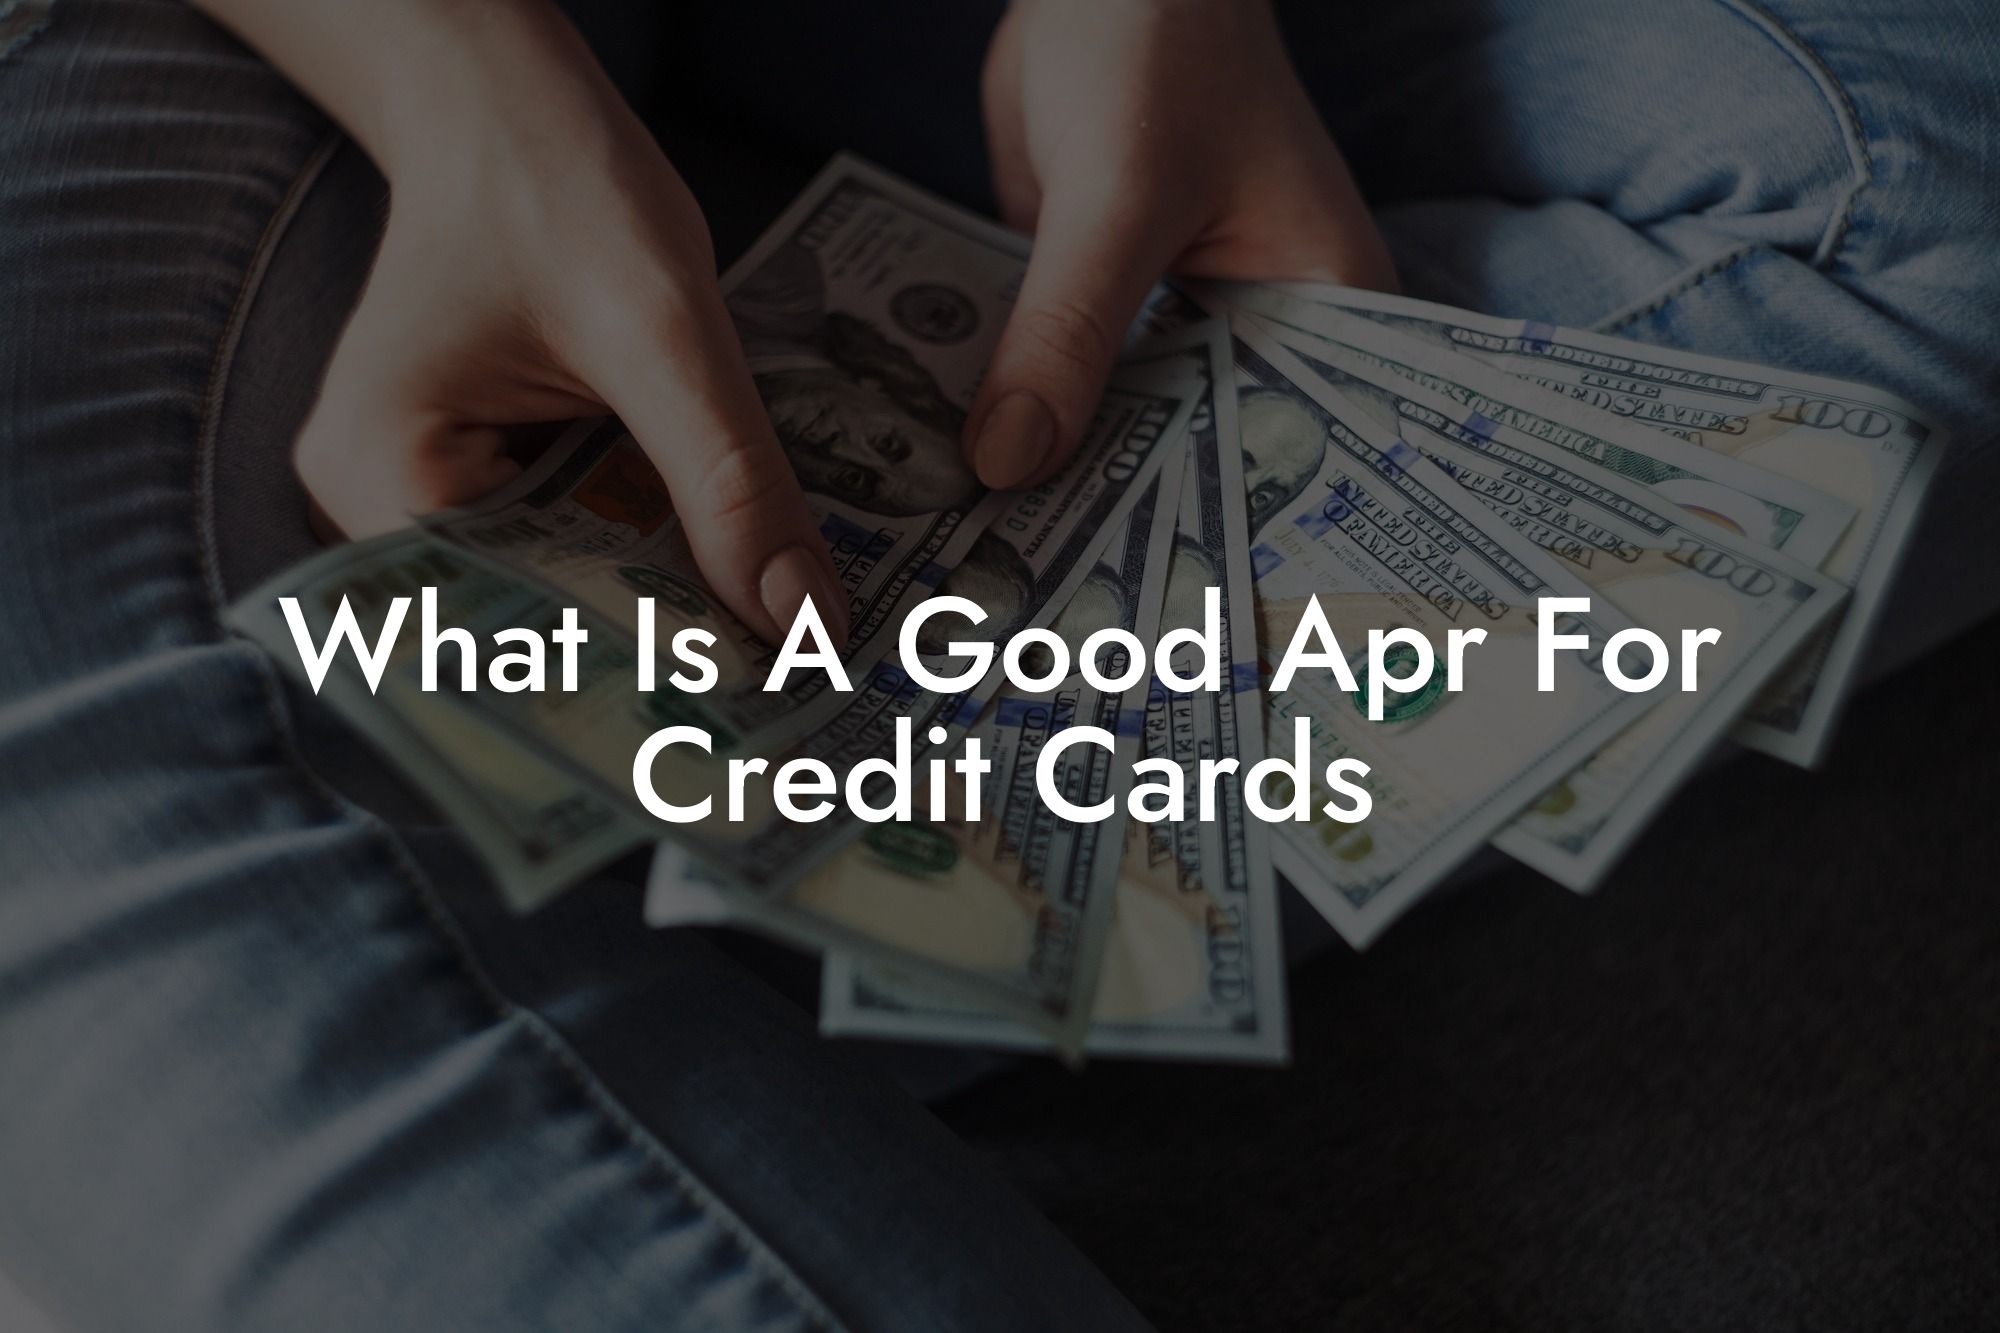 What Is A Good Apr For Credit Cards